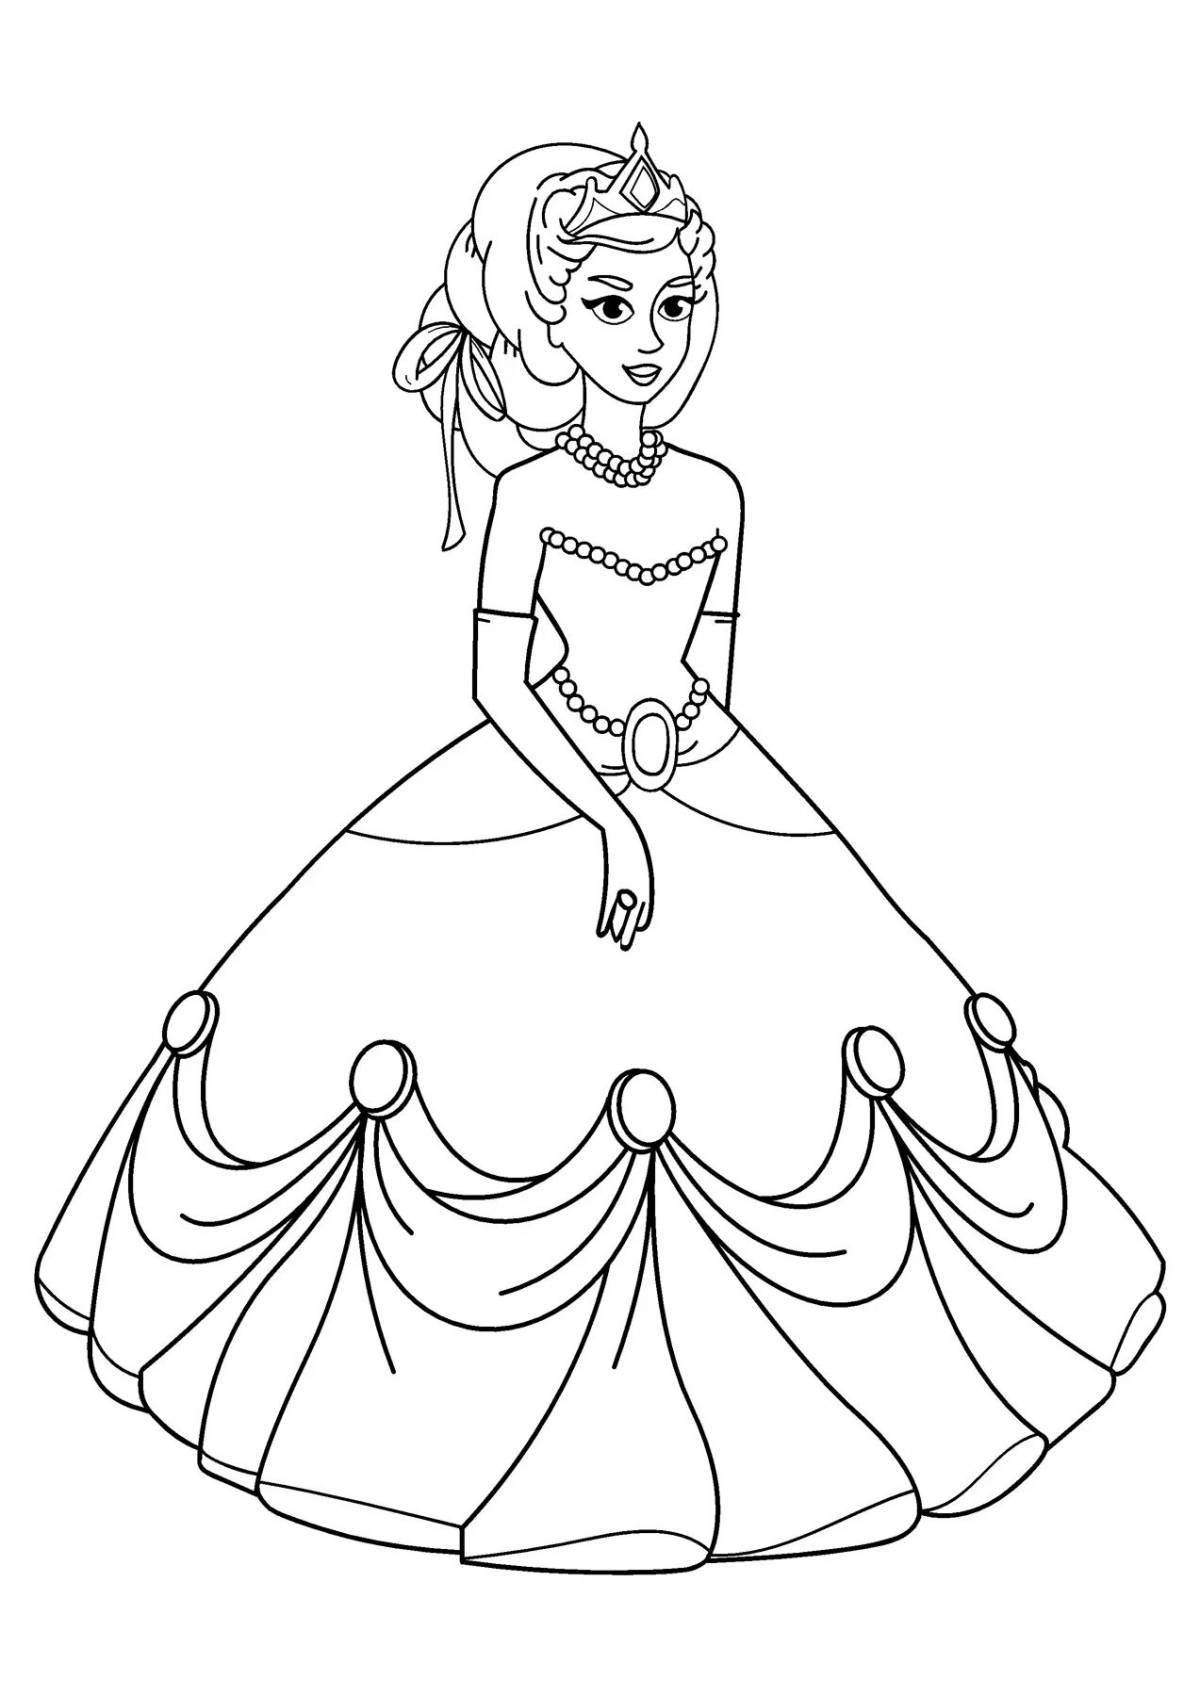 Exquisite princess dress for coloring